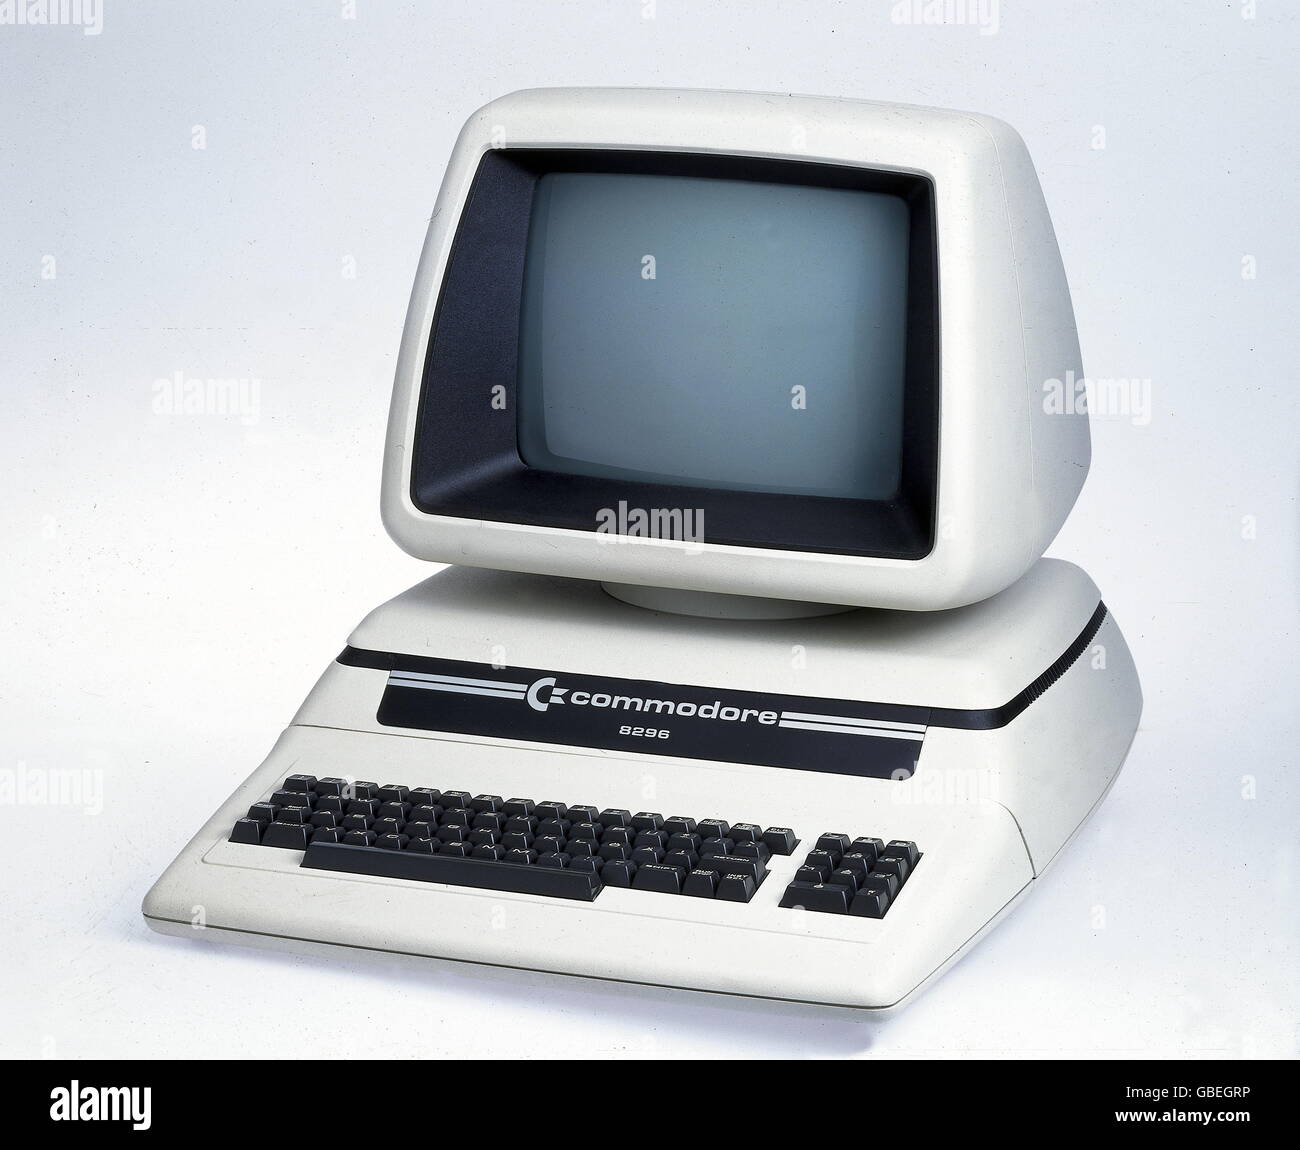 computing / electronics, computer, Commodore 8296, circa 1980, historic, historical, 1980s, 80s, 20th century, monitor, screen, integrated keyboard, technic, technics, hardware, 1970s, Additional-Rights-Clearences-Not Available Stock Photo